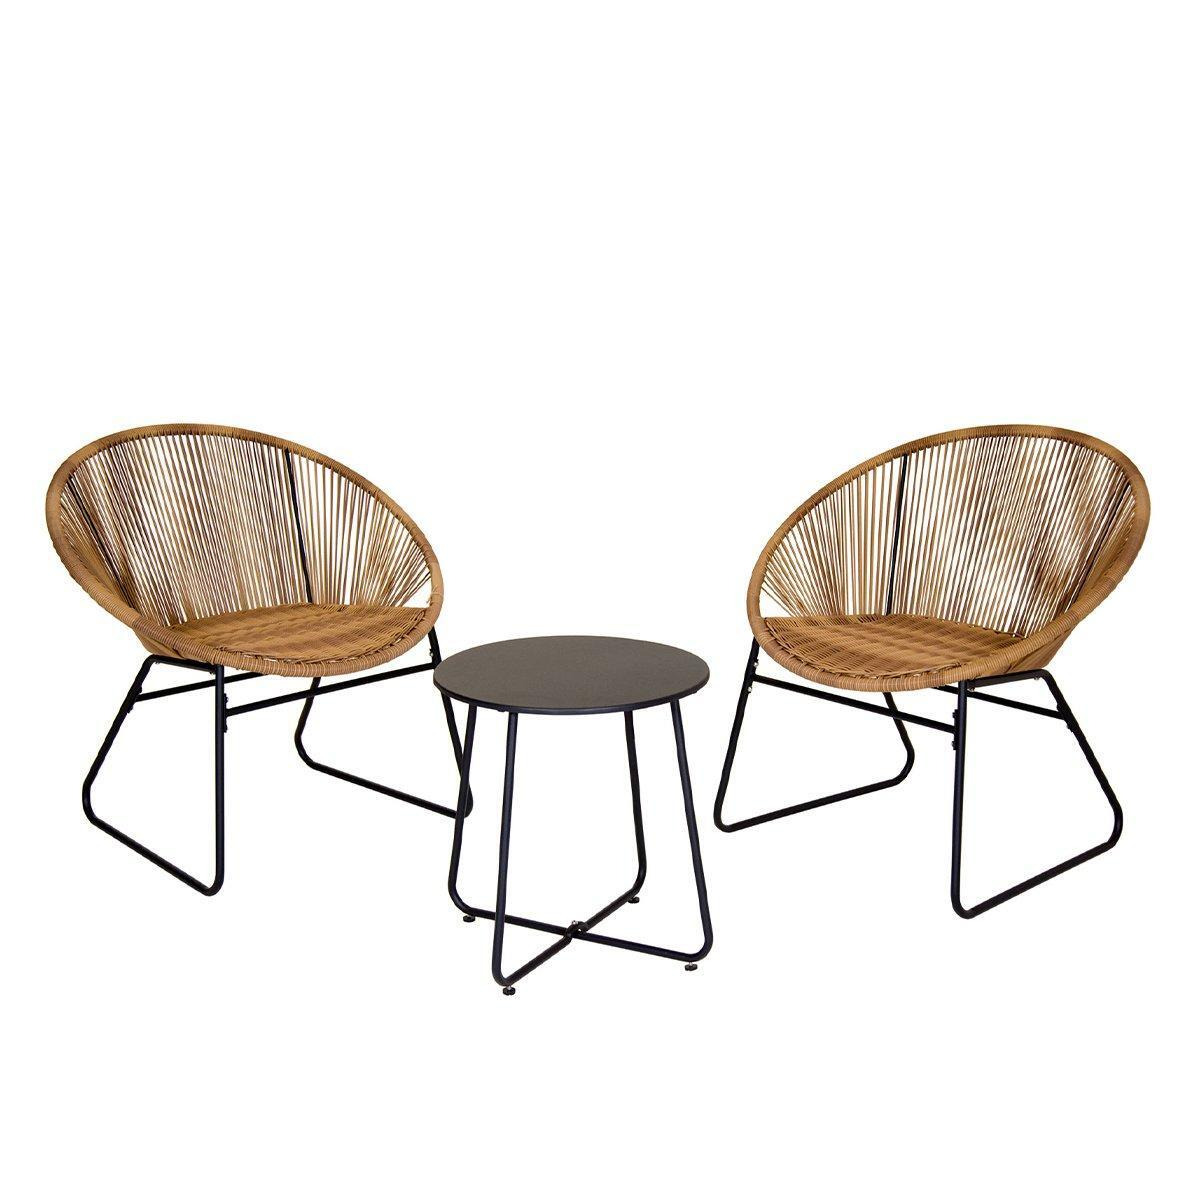 Zanzibar Tea for Two Bistro Set Natural Cafe 2 Chairs and Table - image 1